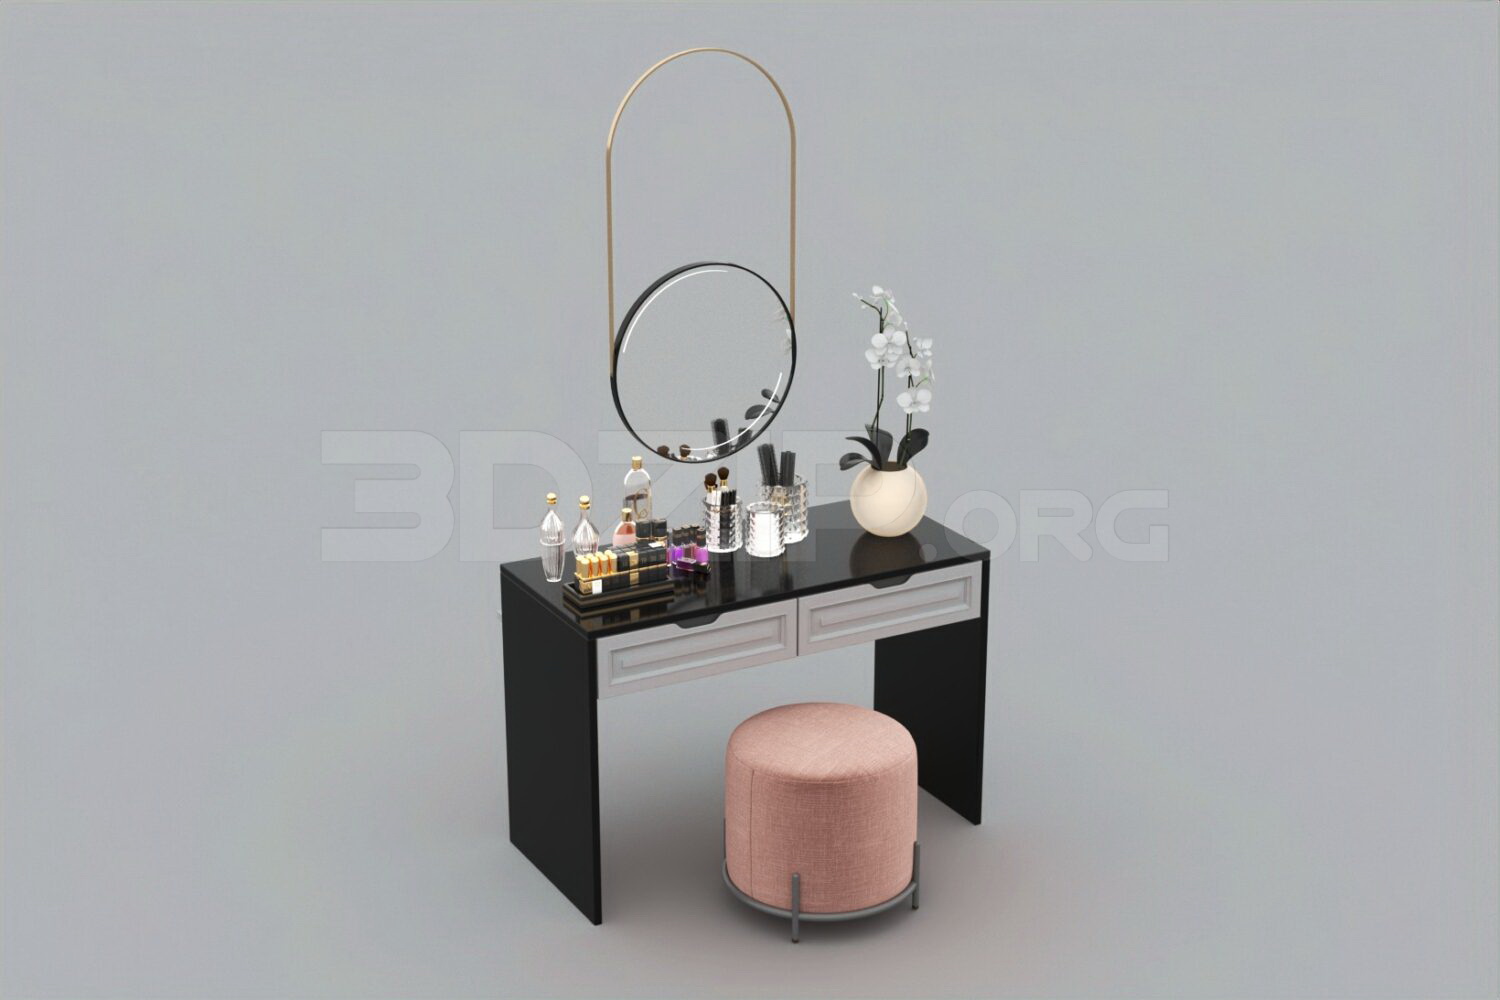 442. Download Free Dressing Table Model By Nguyen Van Son